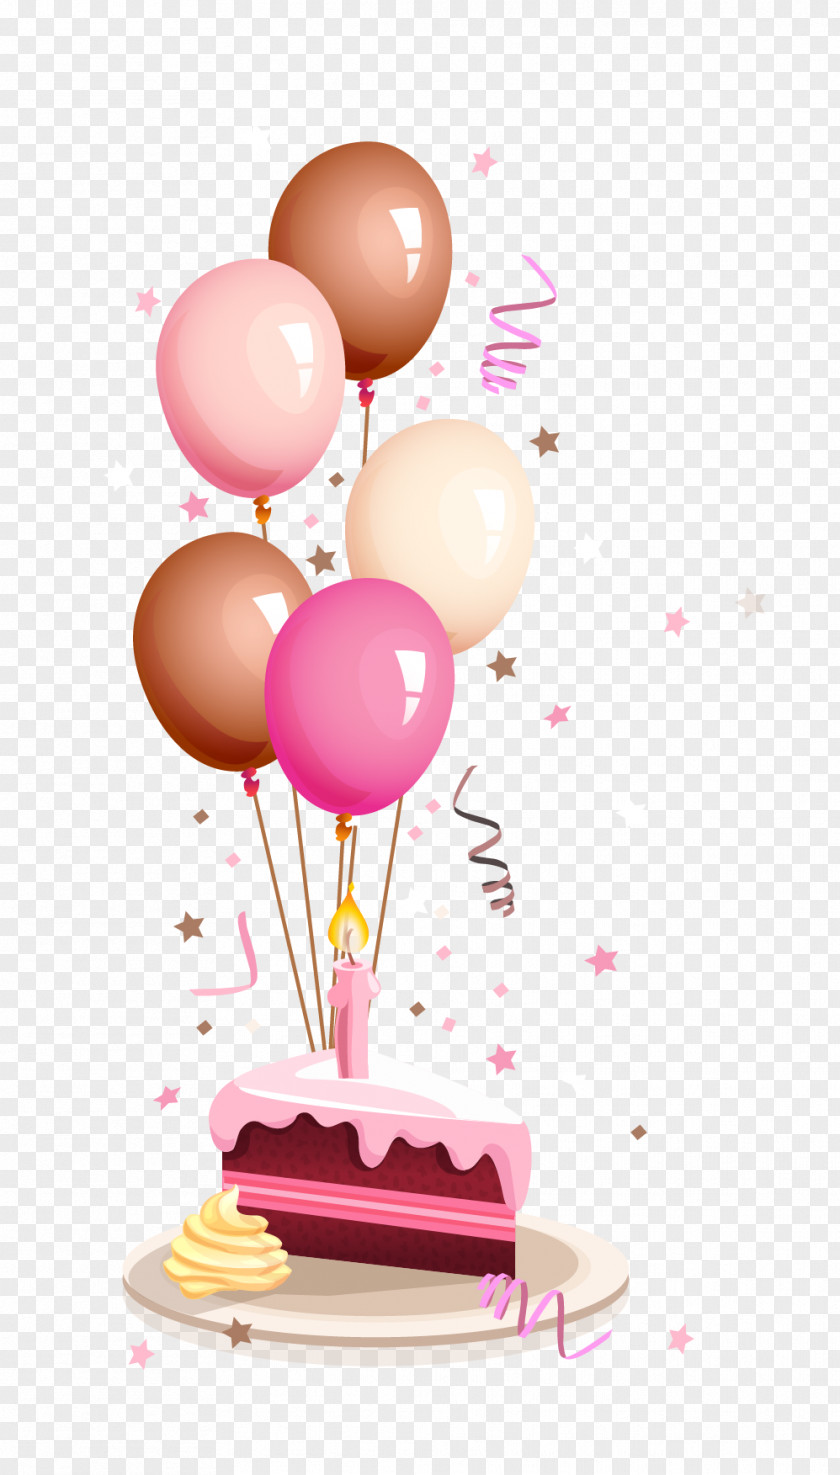 Colorful Balloons And Birthday Cake Cartoon Happy To You Wish Greeting Card PNG